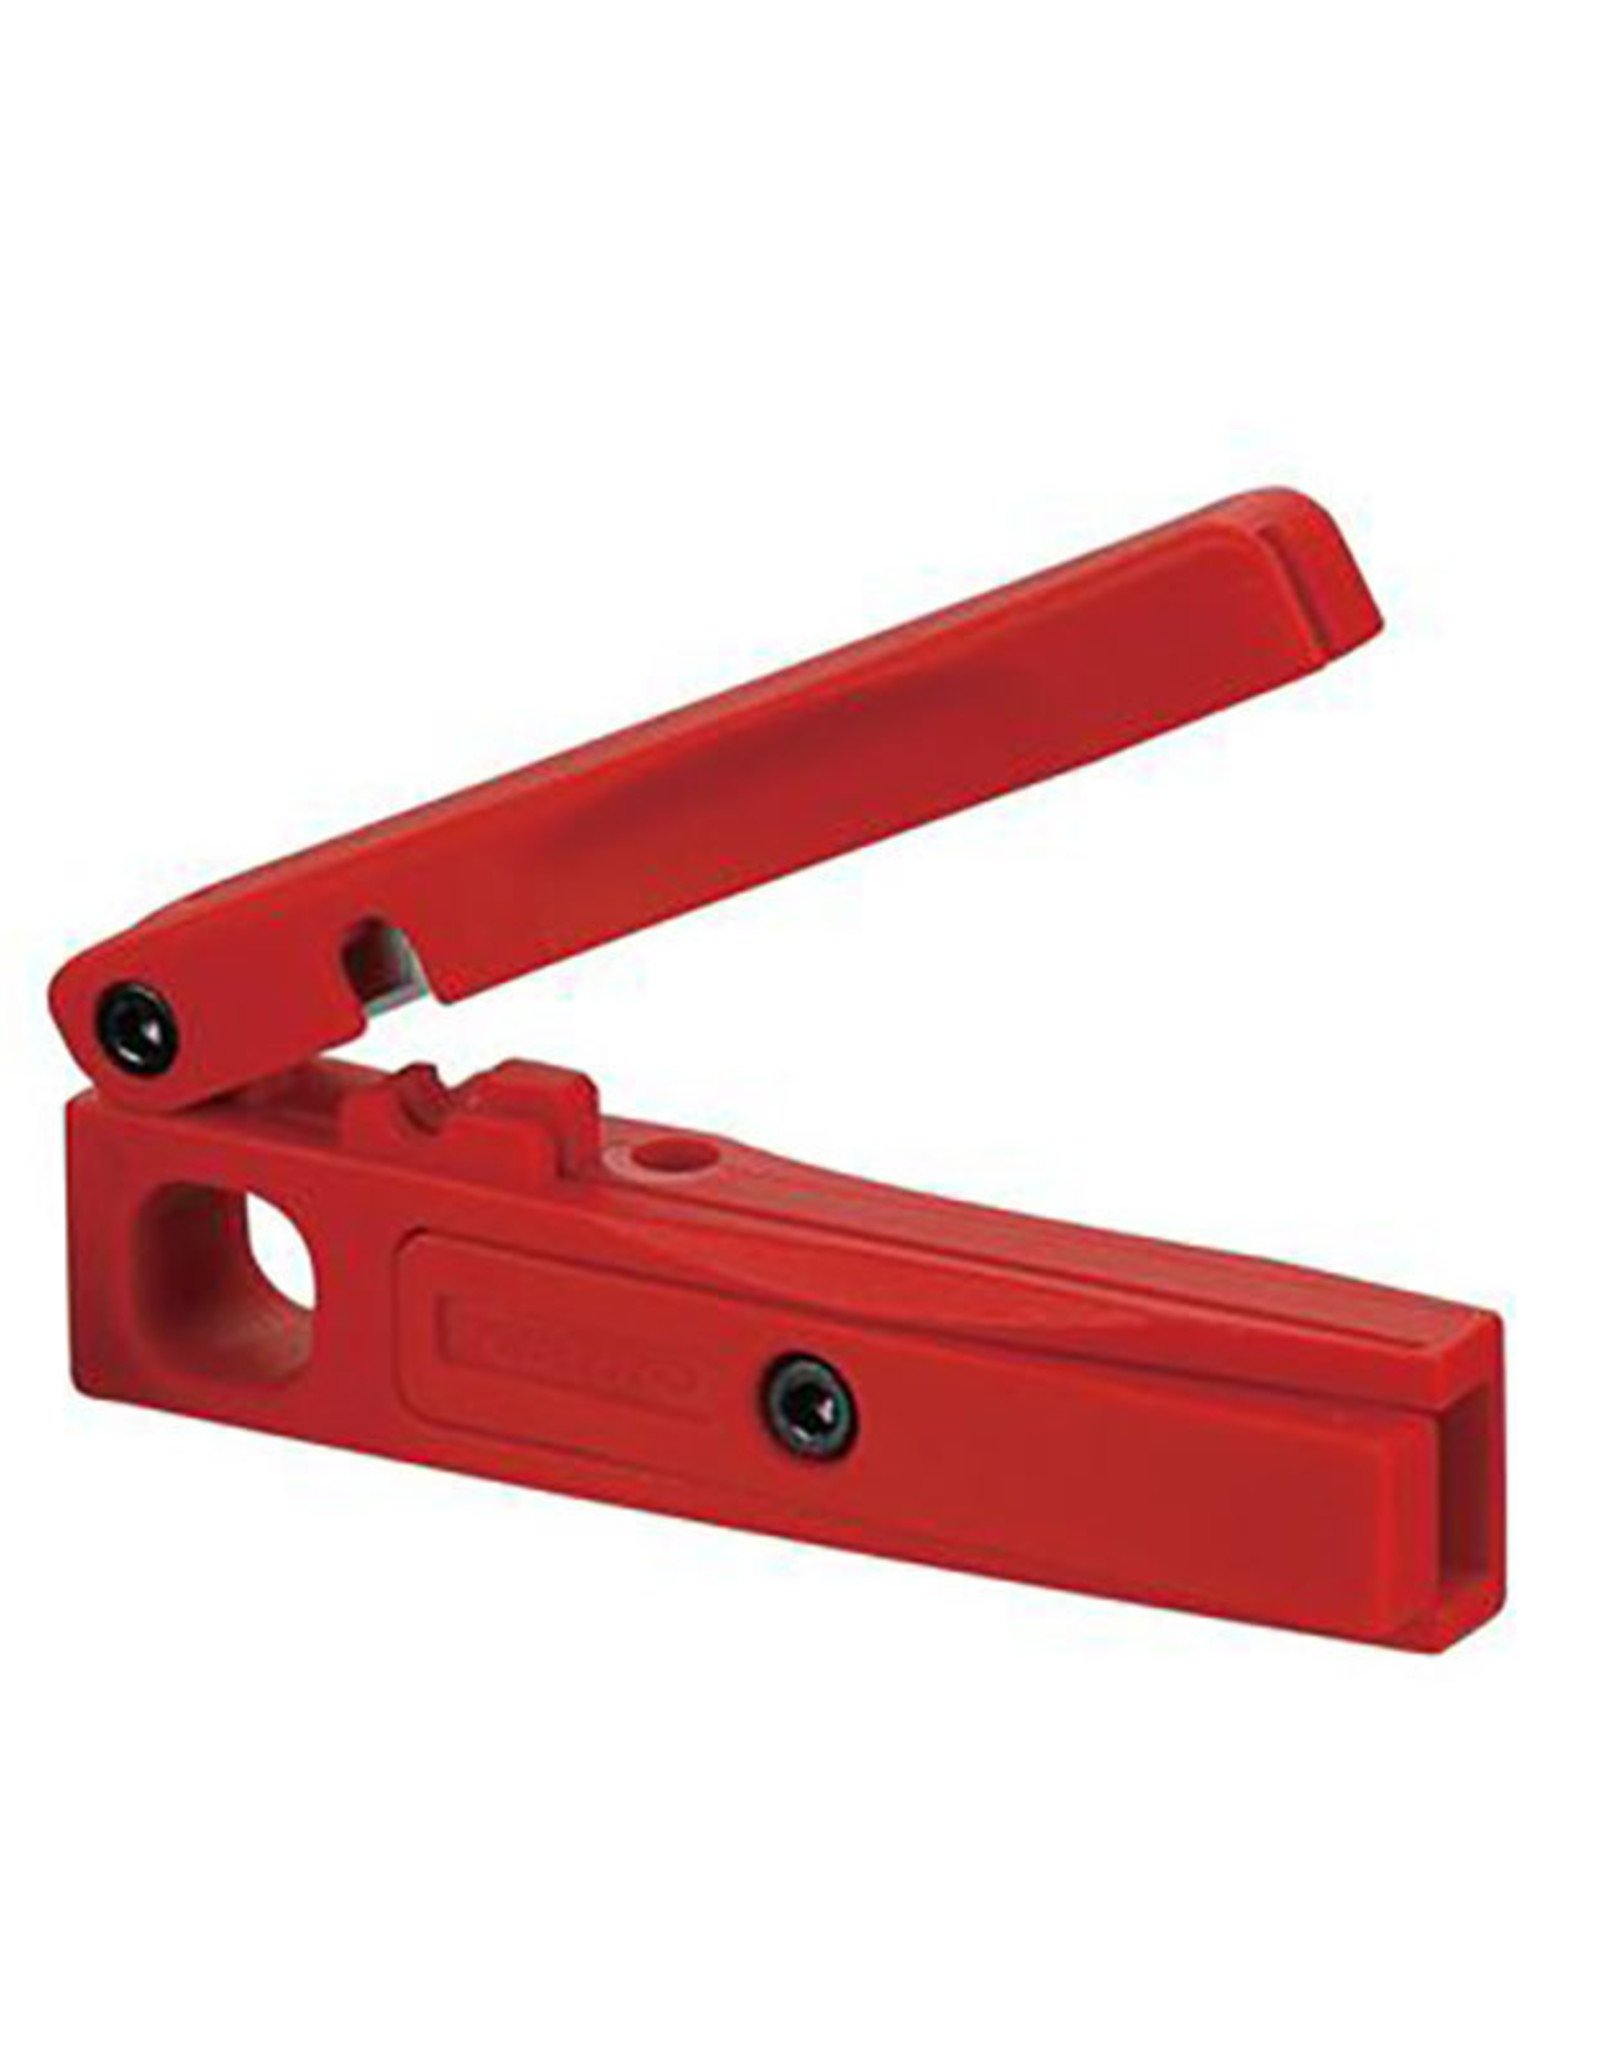 TRP HOSE CUTTER AND BARB PRESS, RED